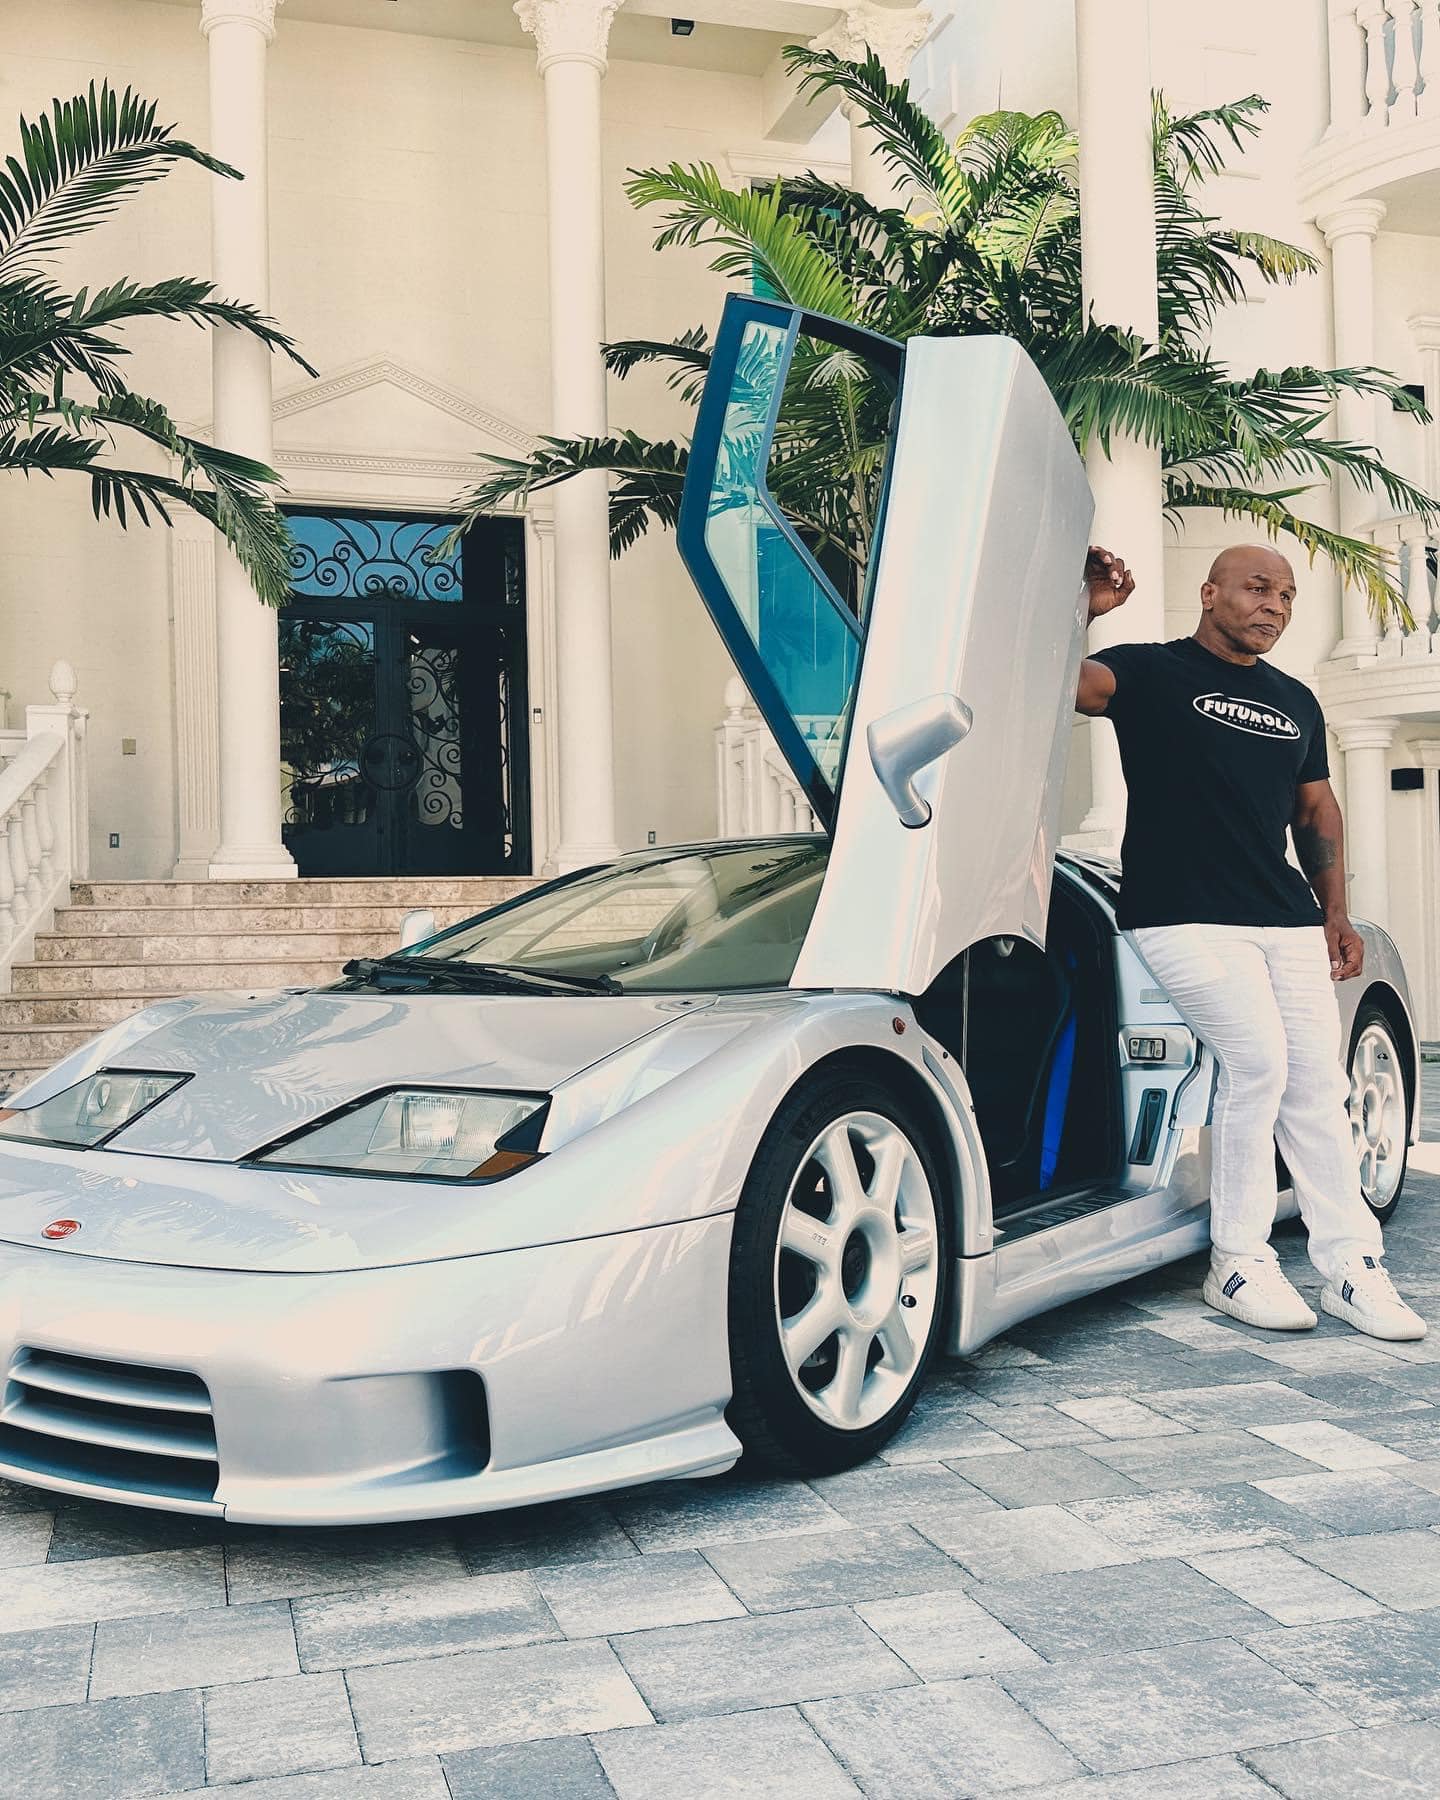 bao mike tyson surprised the whole world when he gave eminem a super rare bugatti eb supercar to wish him the title of the world s most classy rapper and collaborate on a new song 6538e9e254b95 Mike Tyson Surprised The Whole World When He Gave Eminem A Super Rare Bugatti Eb 110 Supercar To Wish Him The Title Of The World's Most Classy Rapper And Collaborate On A New Song.